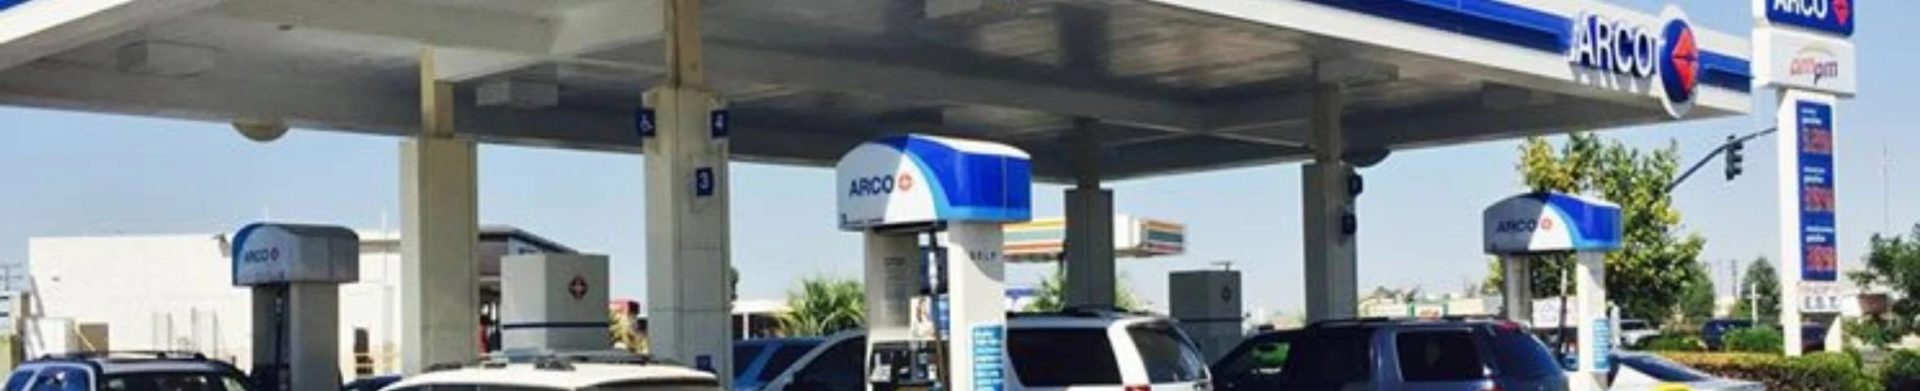 ARCO gas station in the daytime